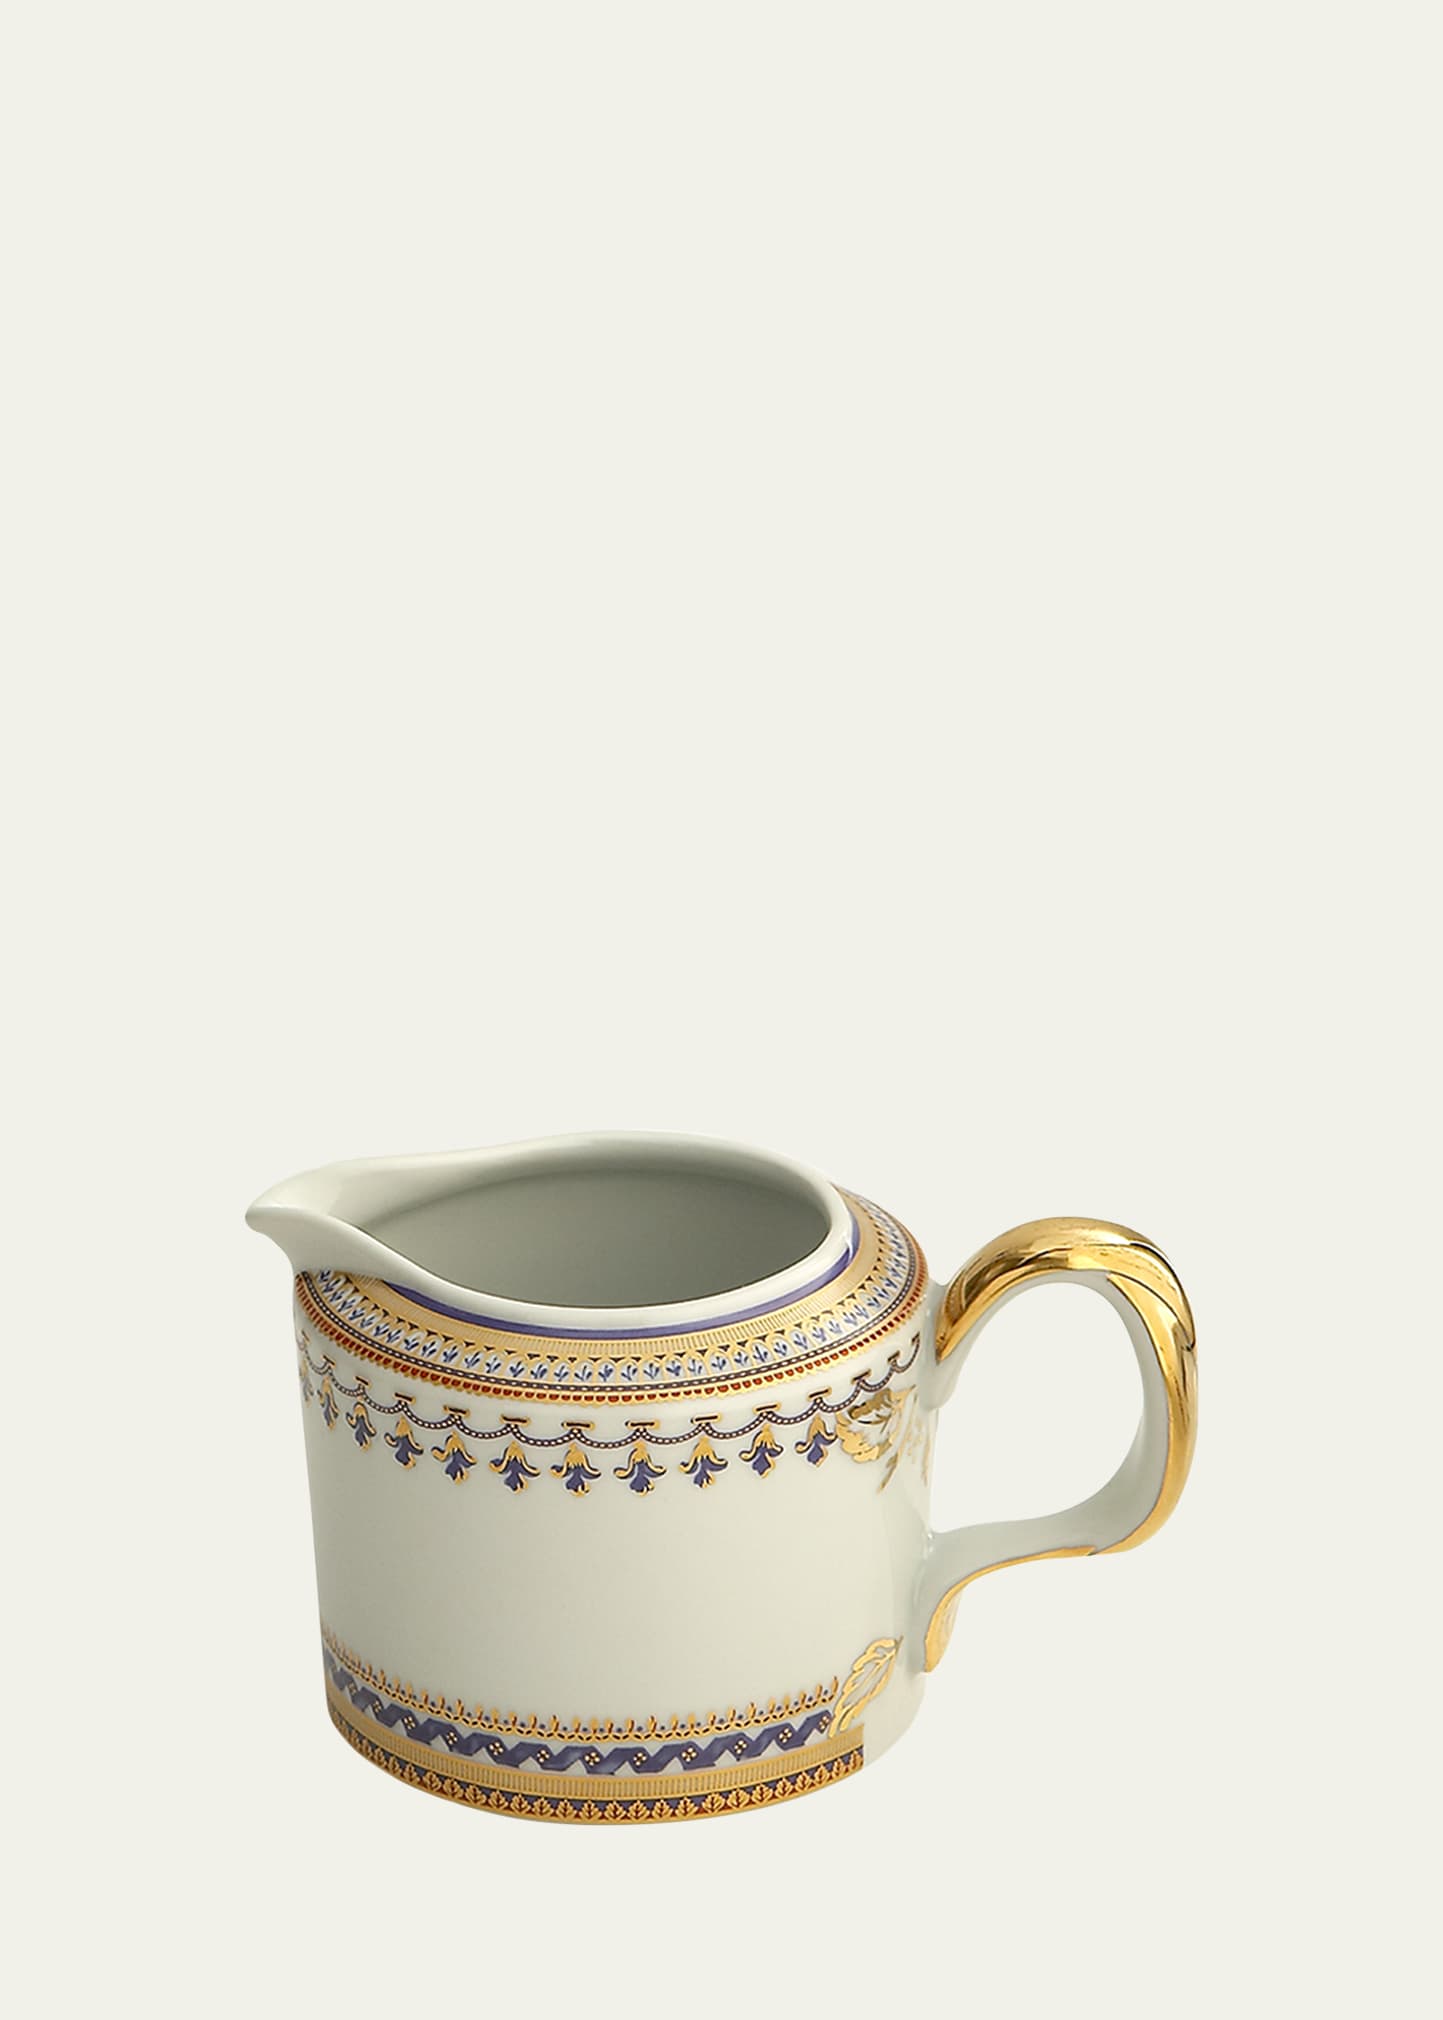 Mottahedeh Chinoise Blue Creamer In White